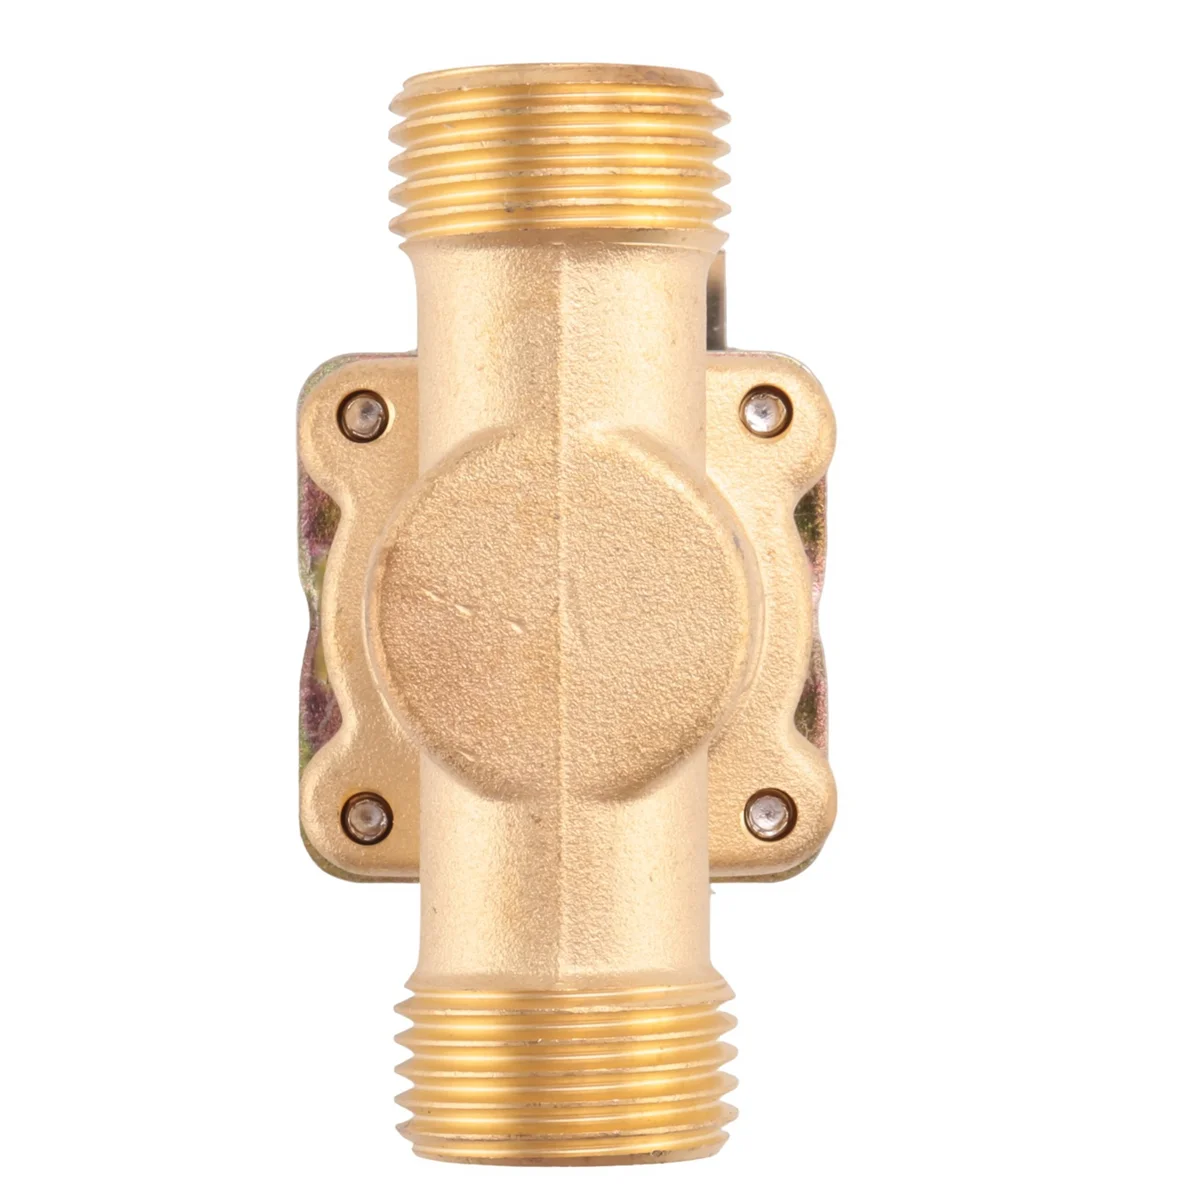 1/2 inch Ac 220V Normally Closed Brass Electric Solenoid Magnetic Valve for Water Control Chemical Liquid Industry Pumps